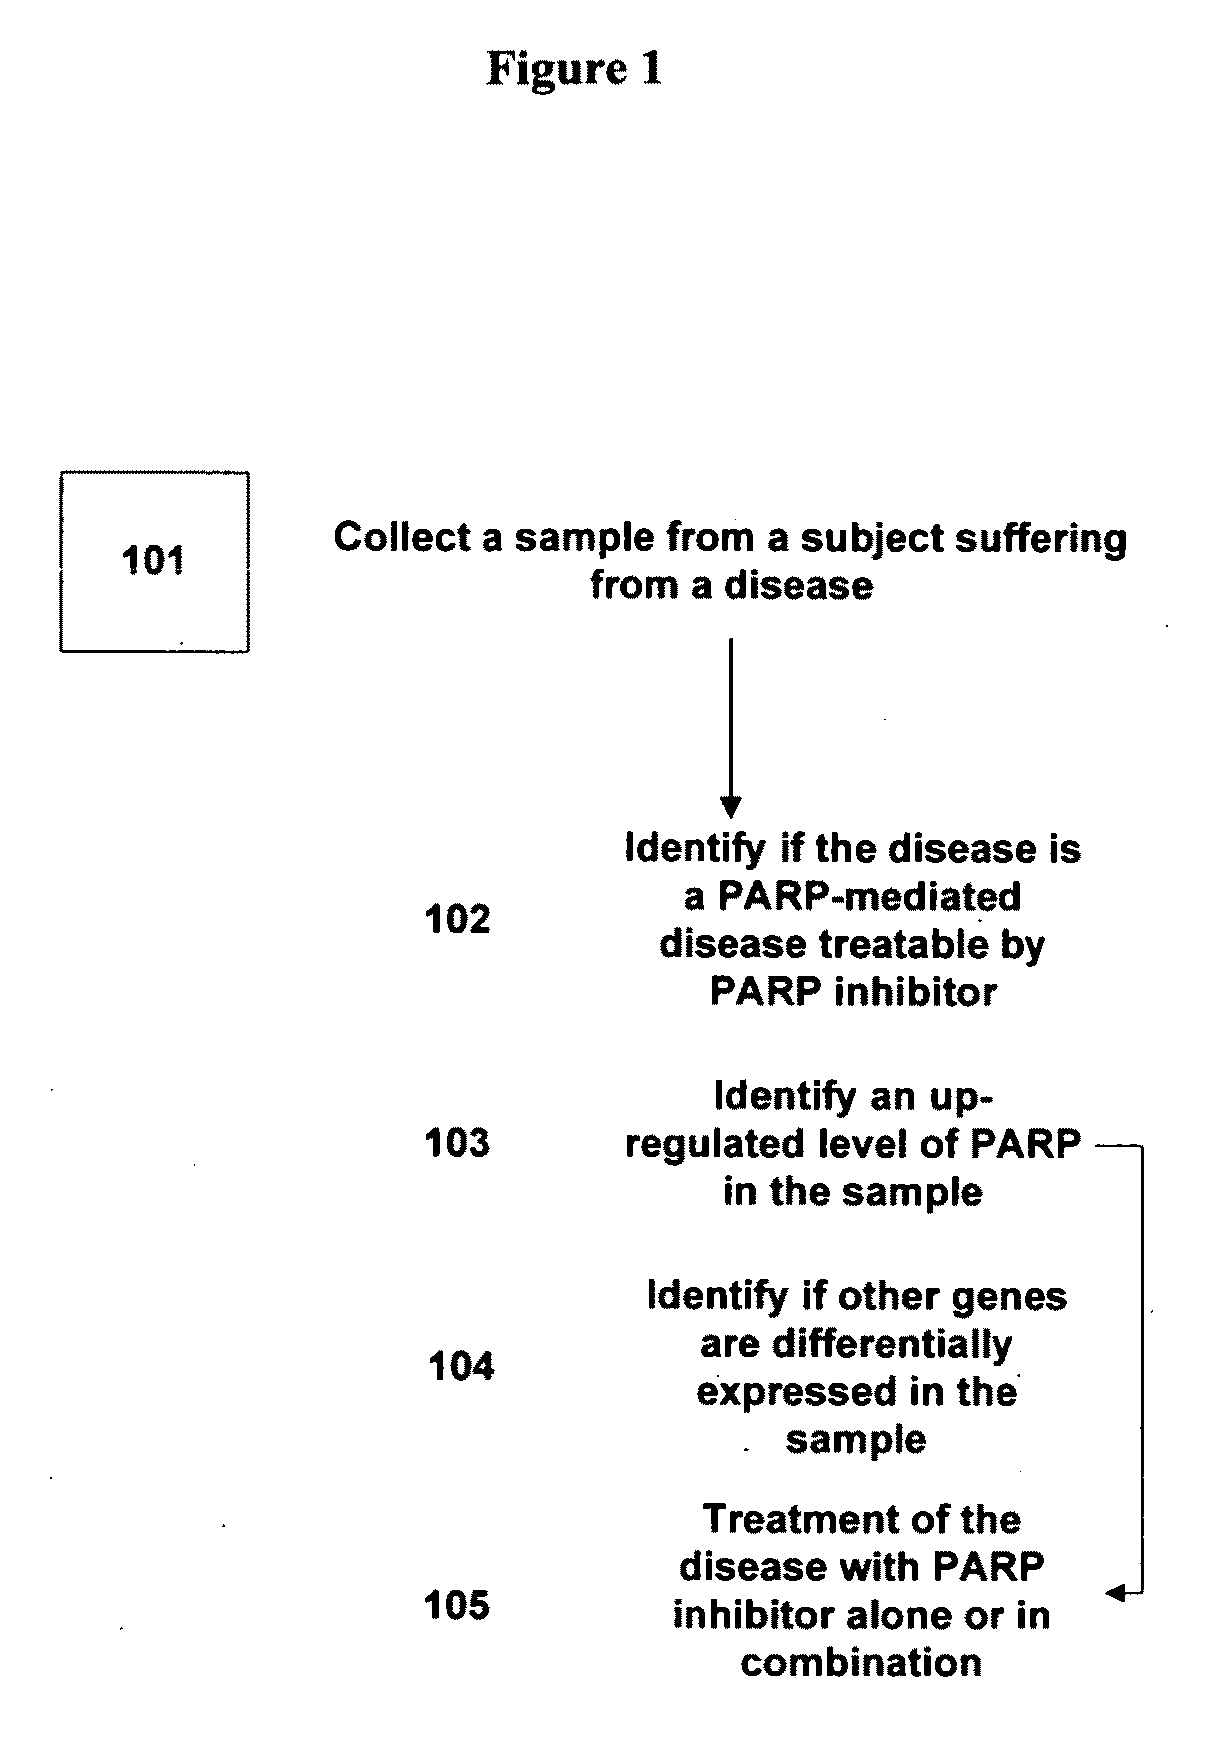 Methods of diagnosing and treating parp-mediated diseases